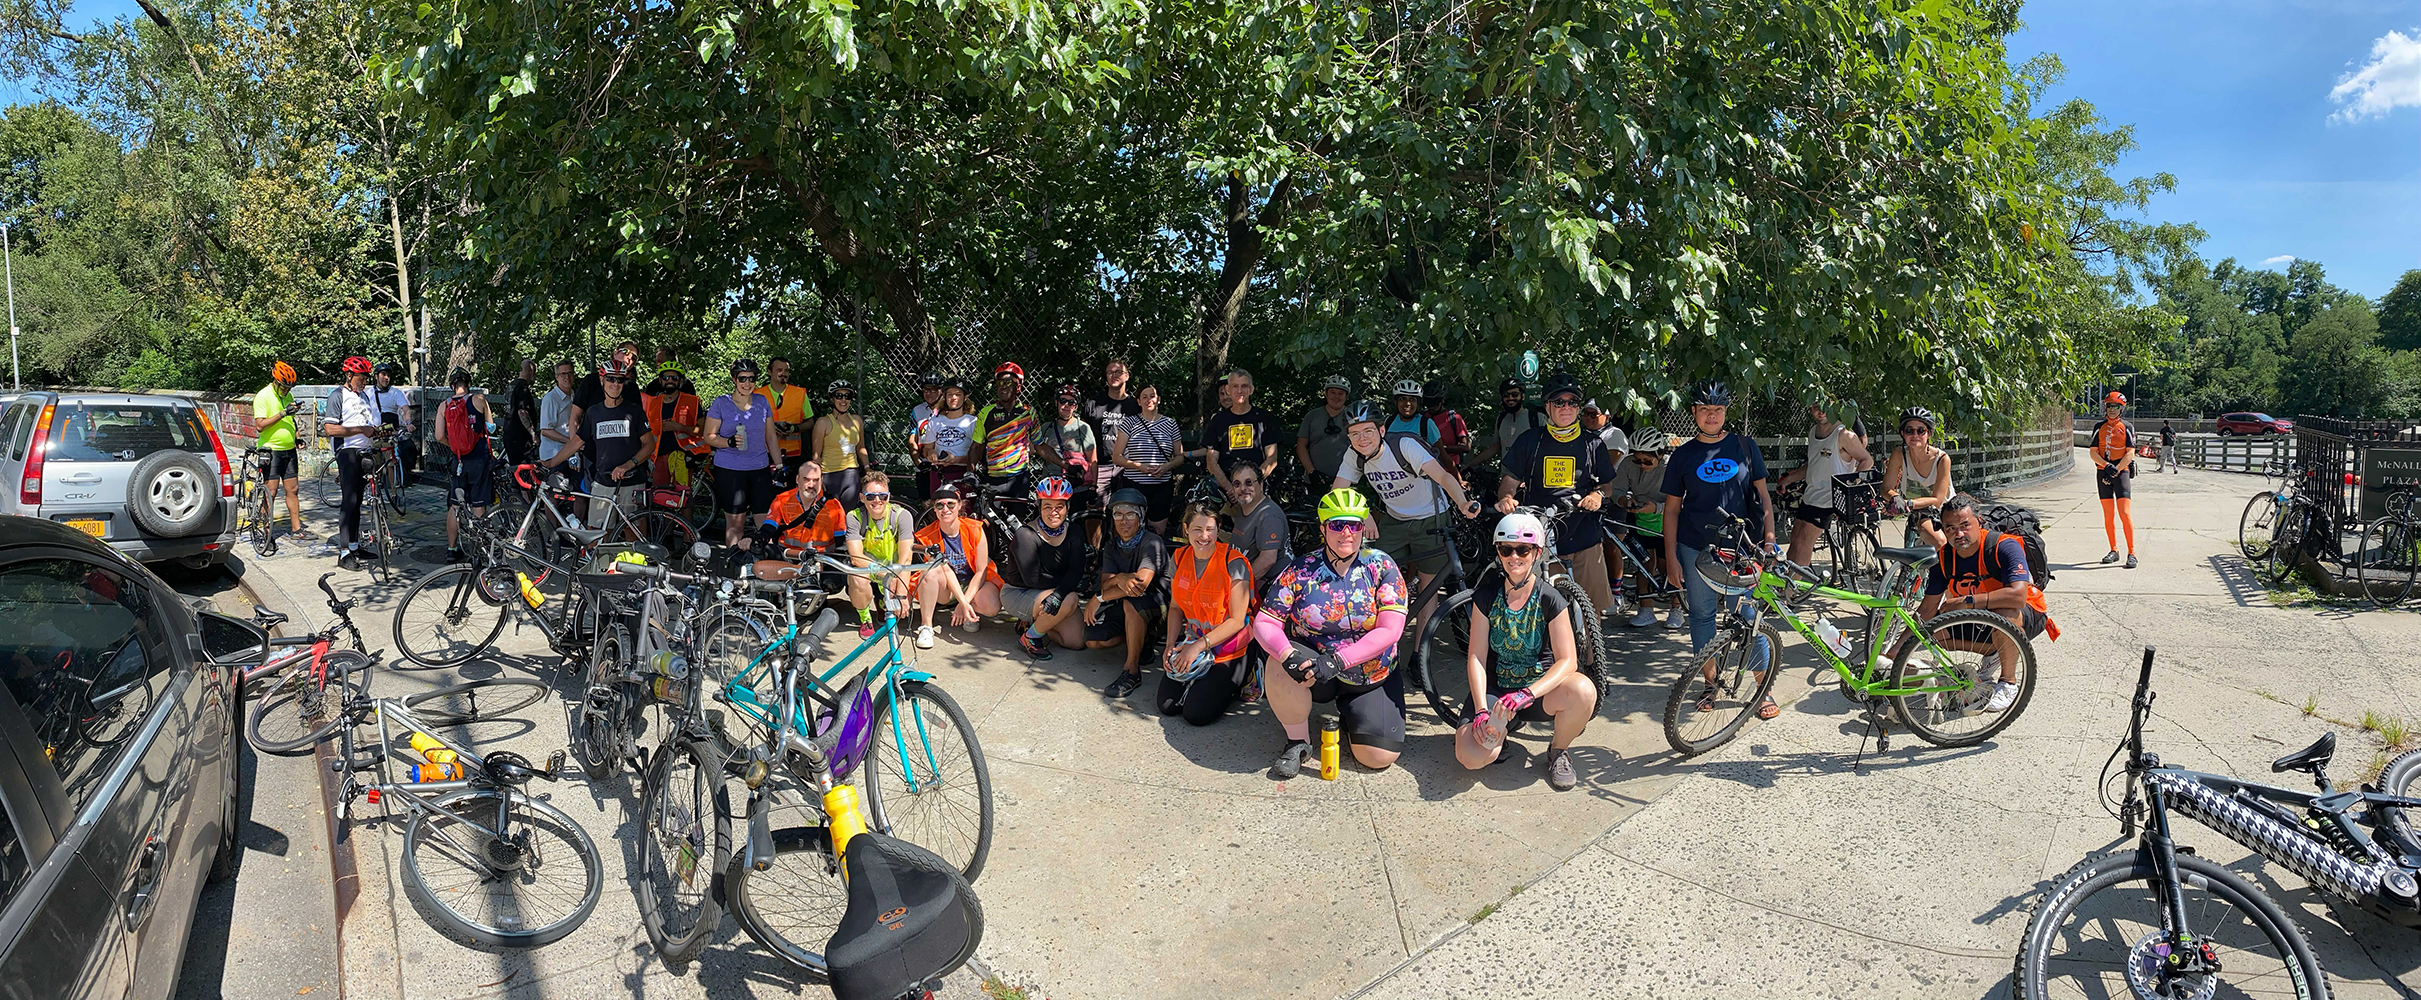 Panorama of activists at the ride